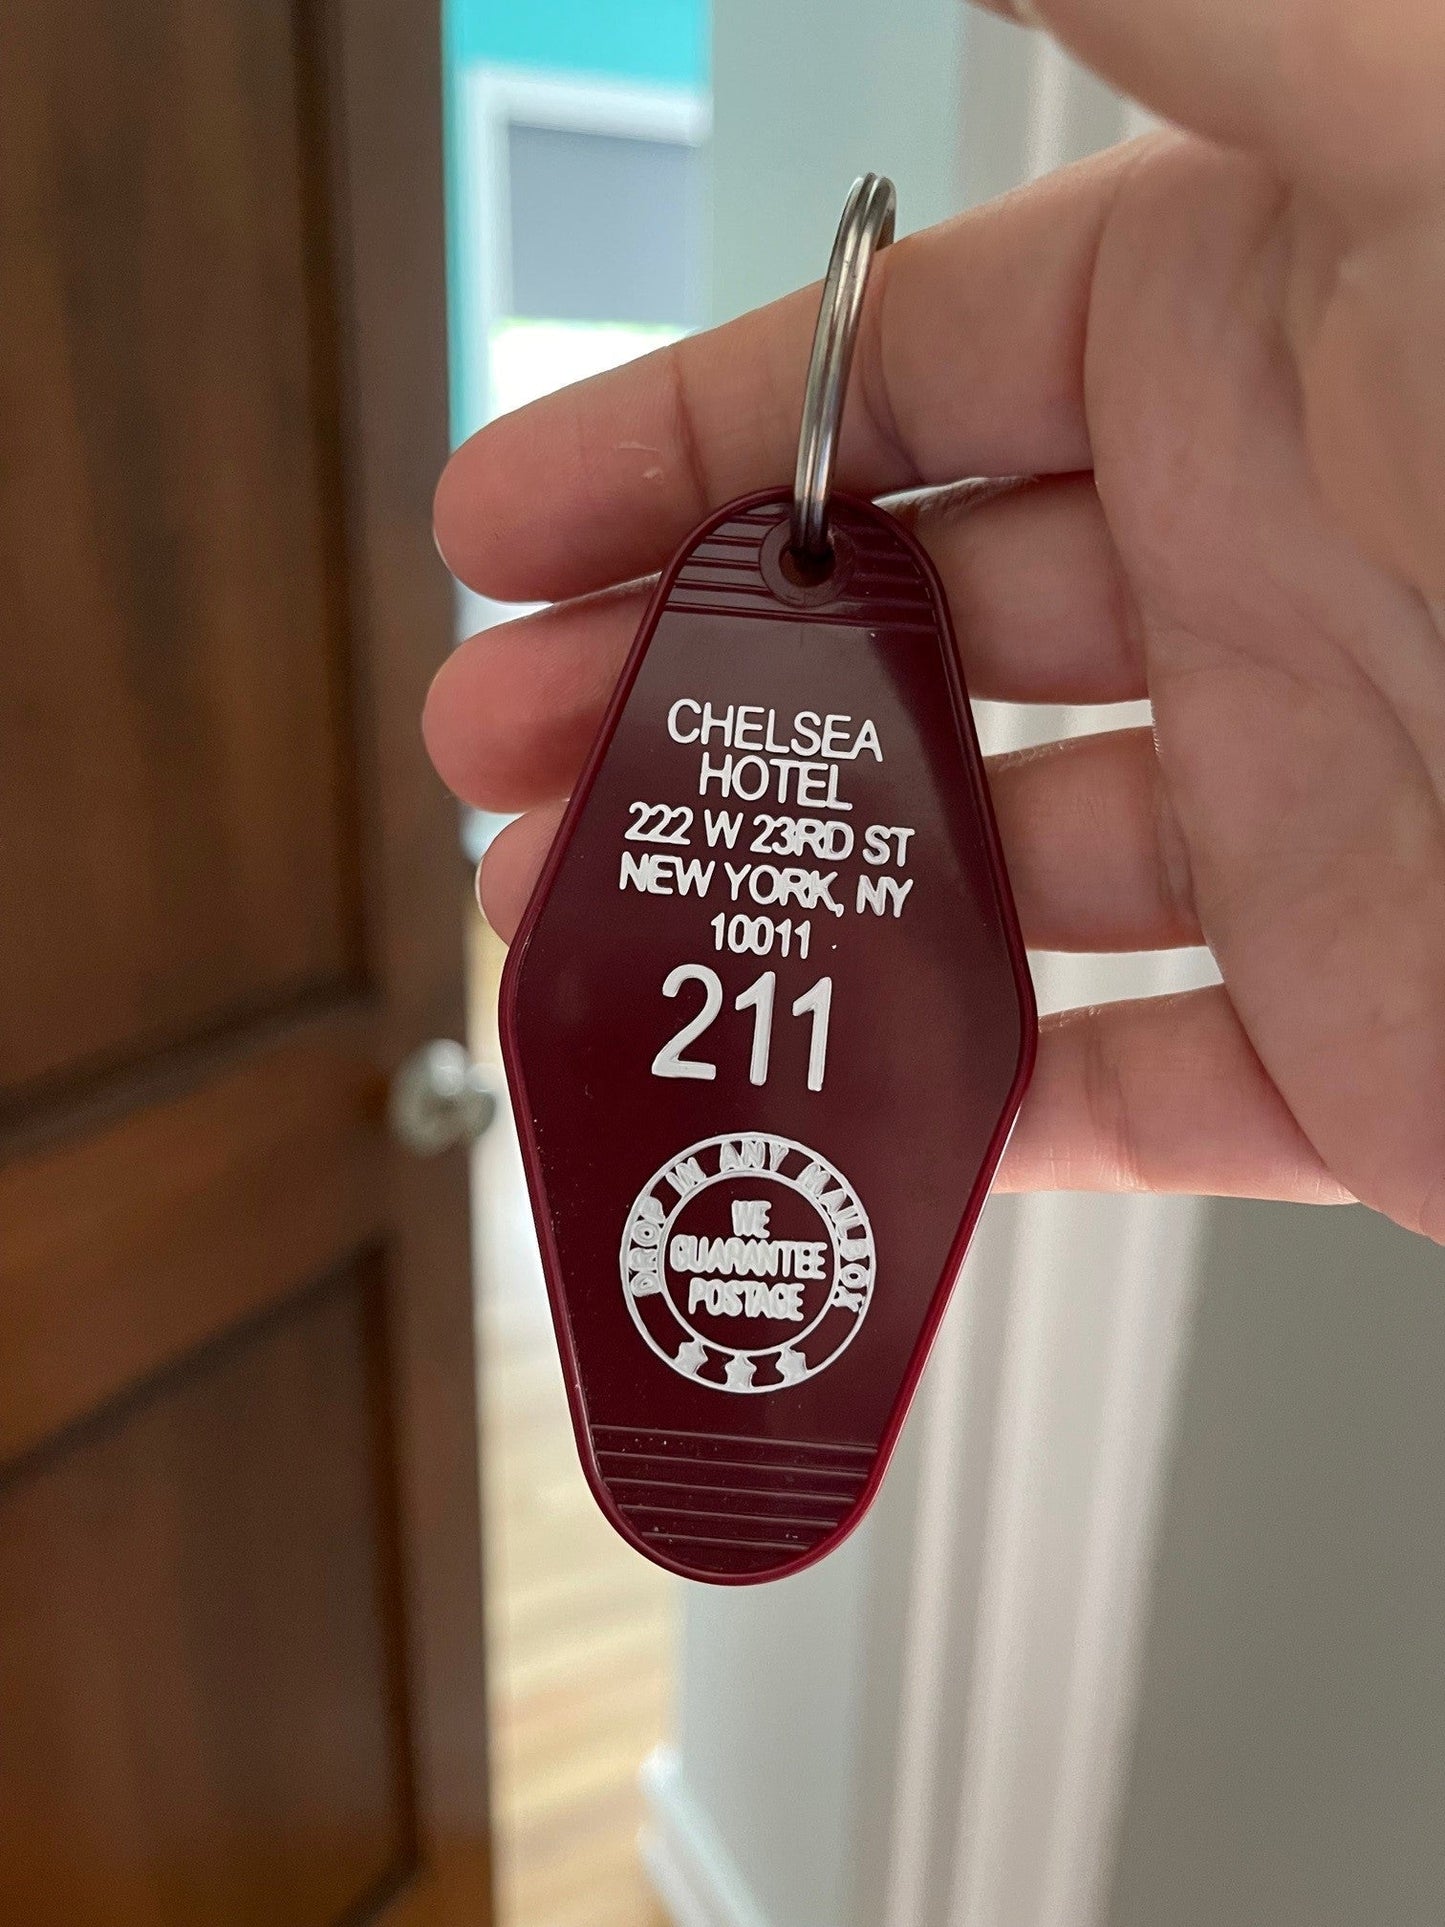 maroon colored plastic hotel key FOB with Chelsea Hotel NY address and room number 211